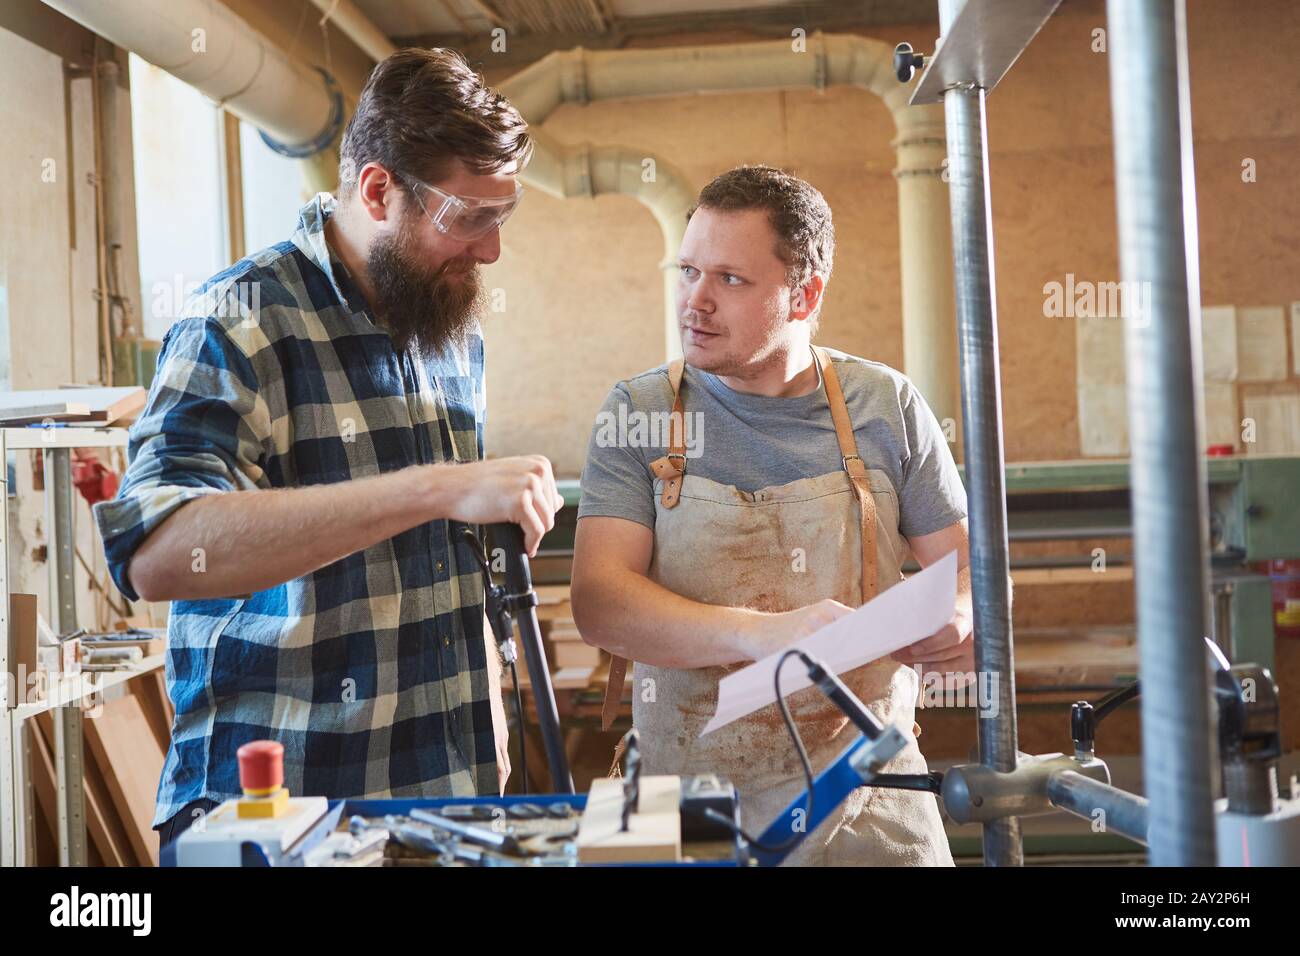 Carpenter apprentice discusses a carpentry job on paper with instructor Stock Photo